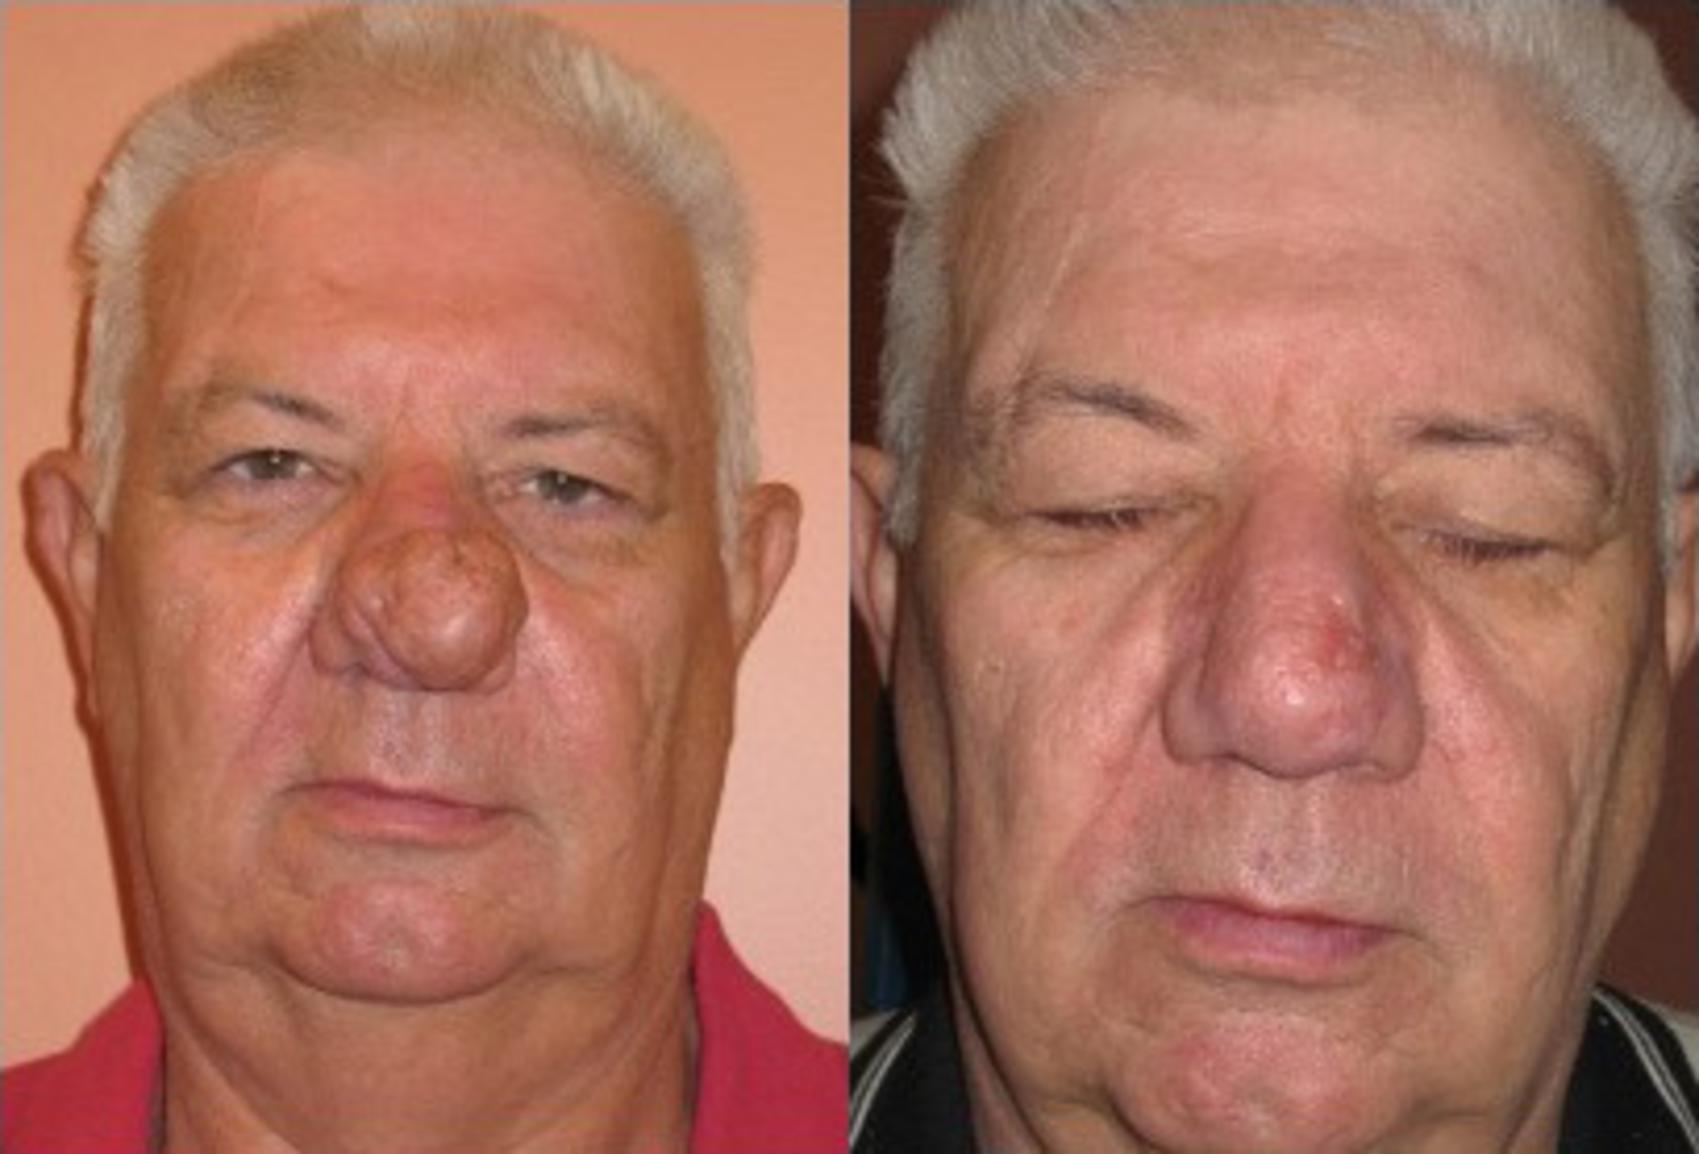 Rhynophyma Dermabrasion Before & After Photo | Scottsdale, AZ | Hobgood Facial Plastic Surgery: Todd Hobgood, MD